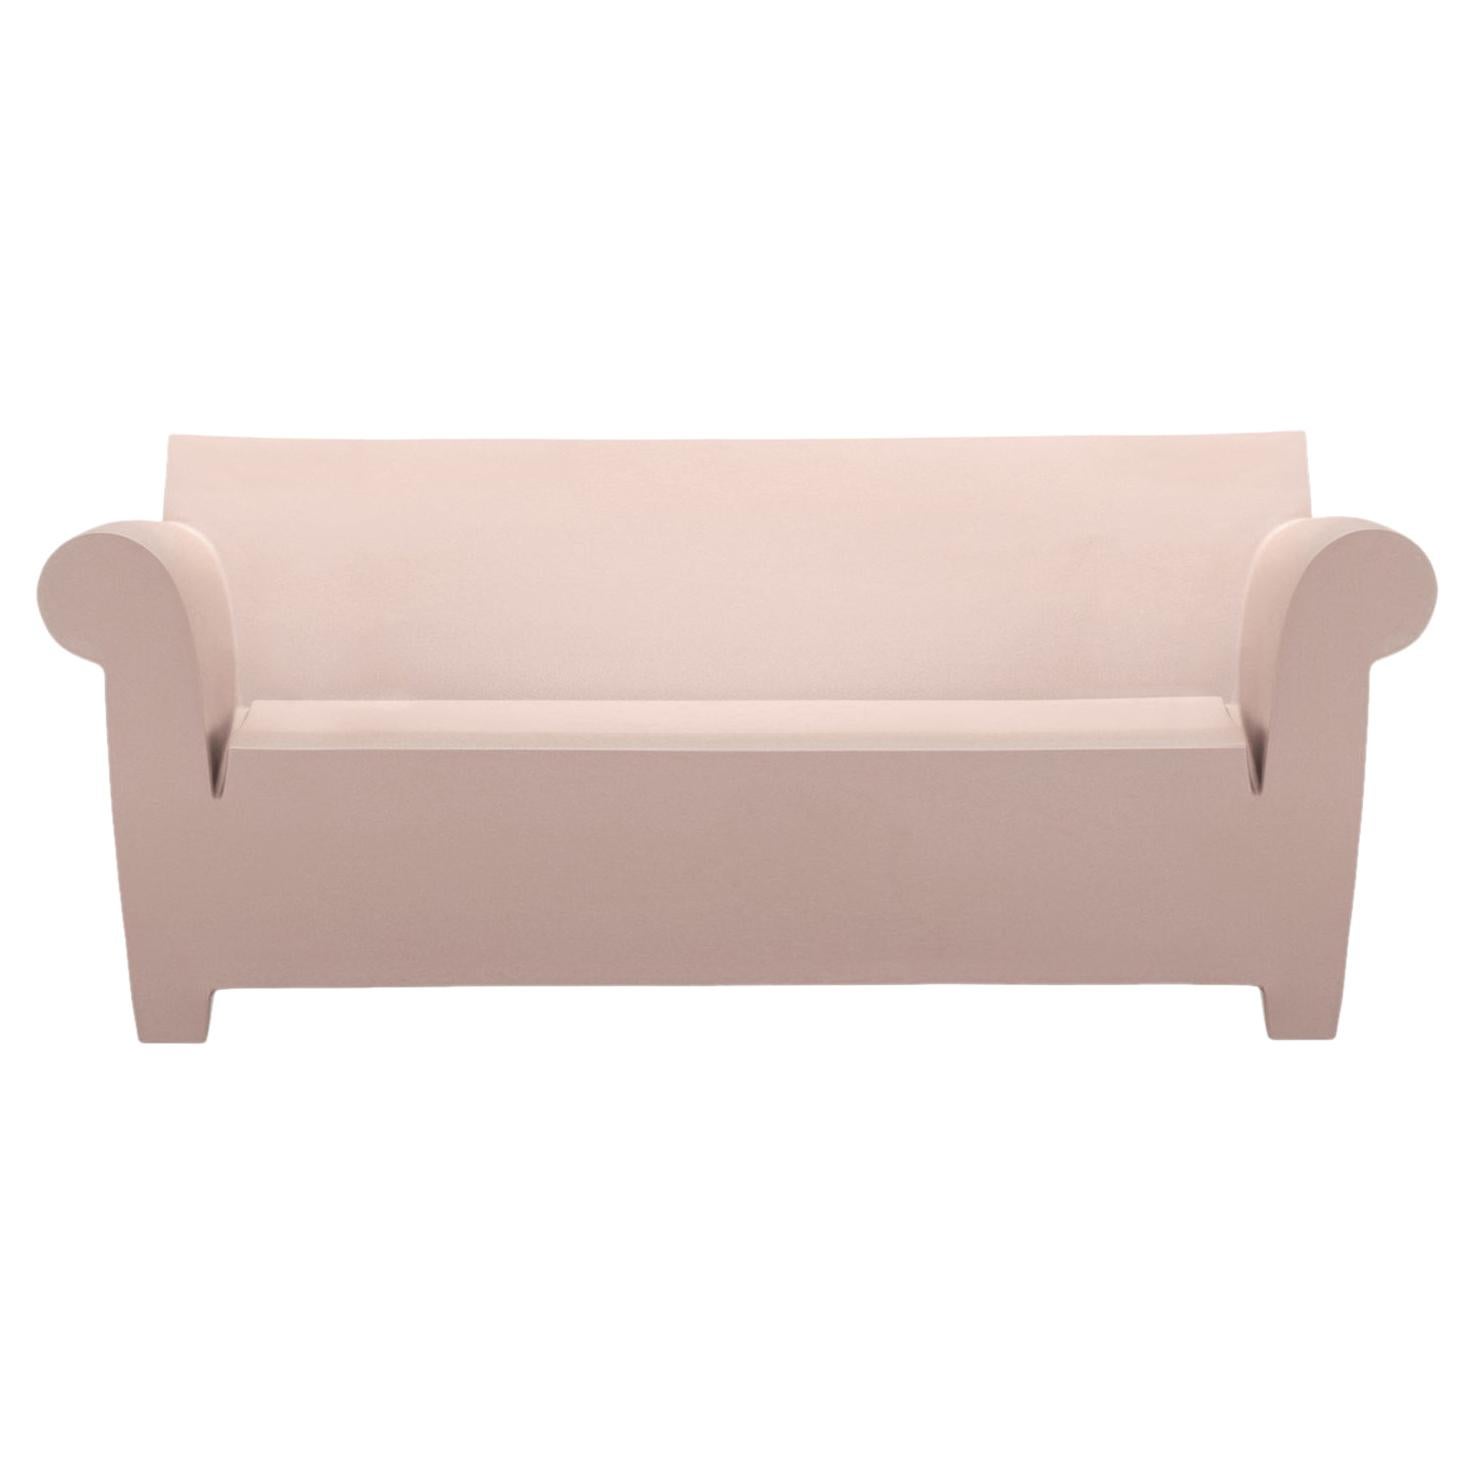 Kartell Bubble Club 2-Seat Sofa in Powder by Philippe Starck